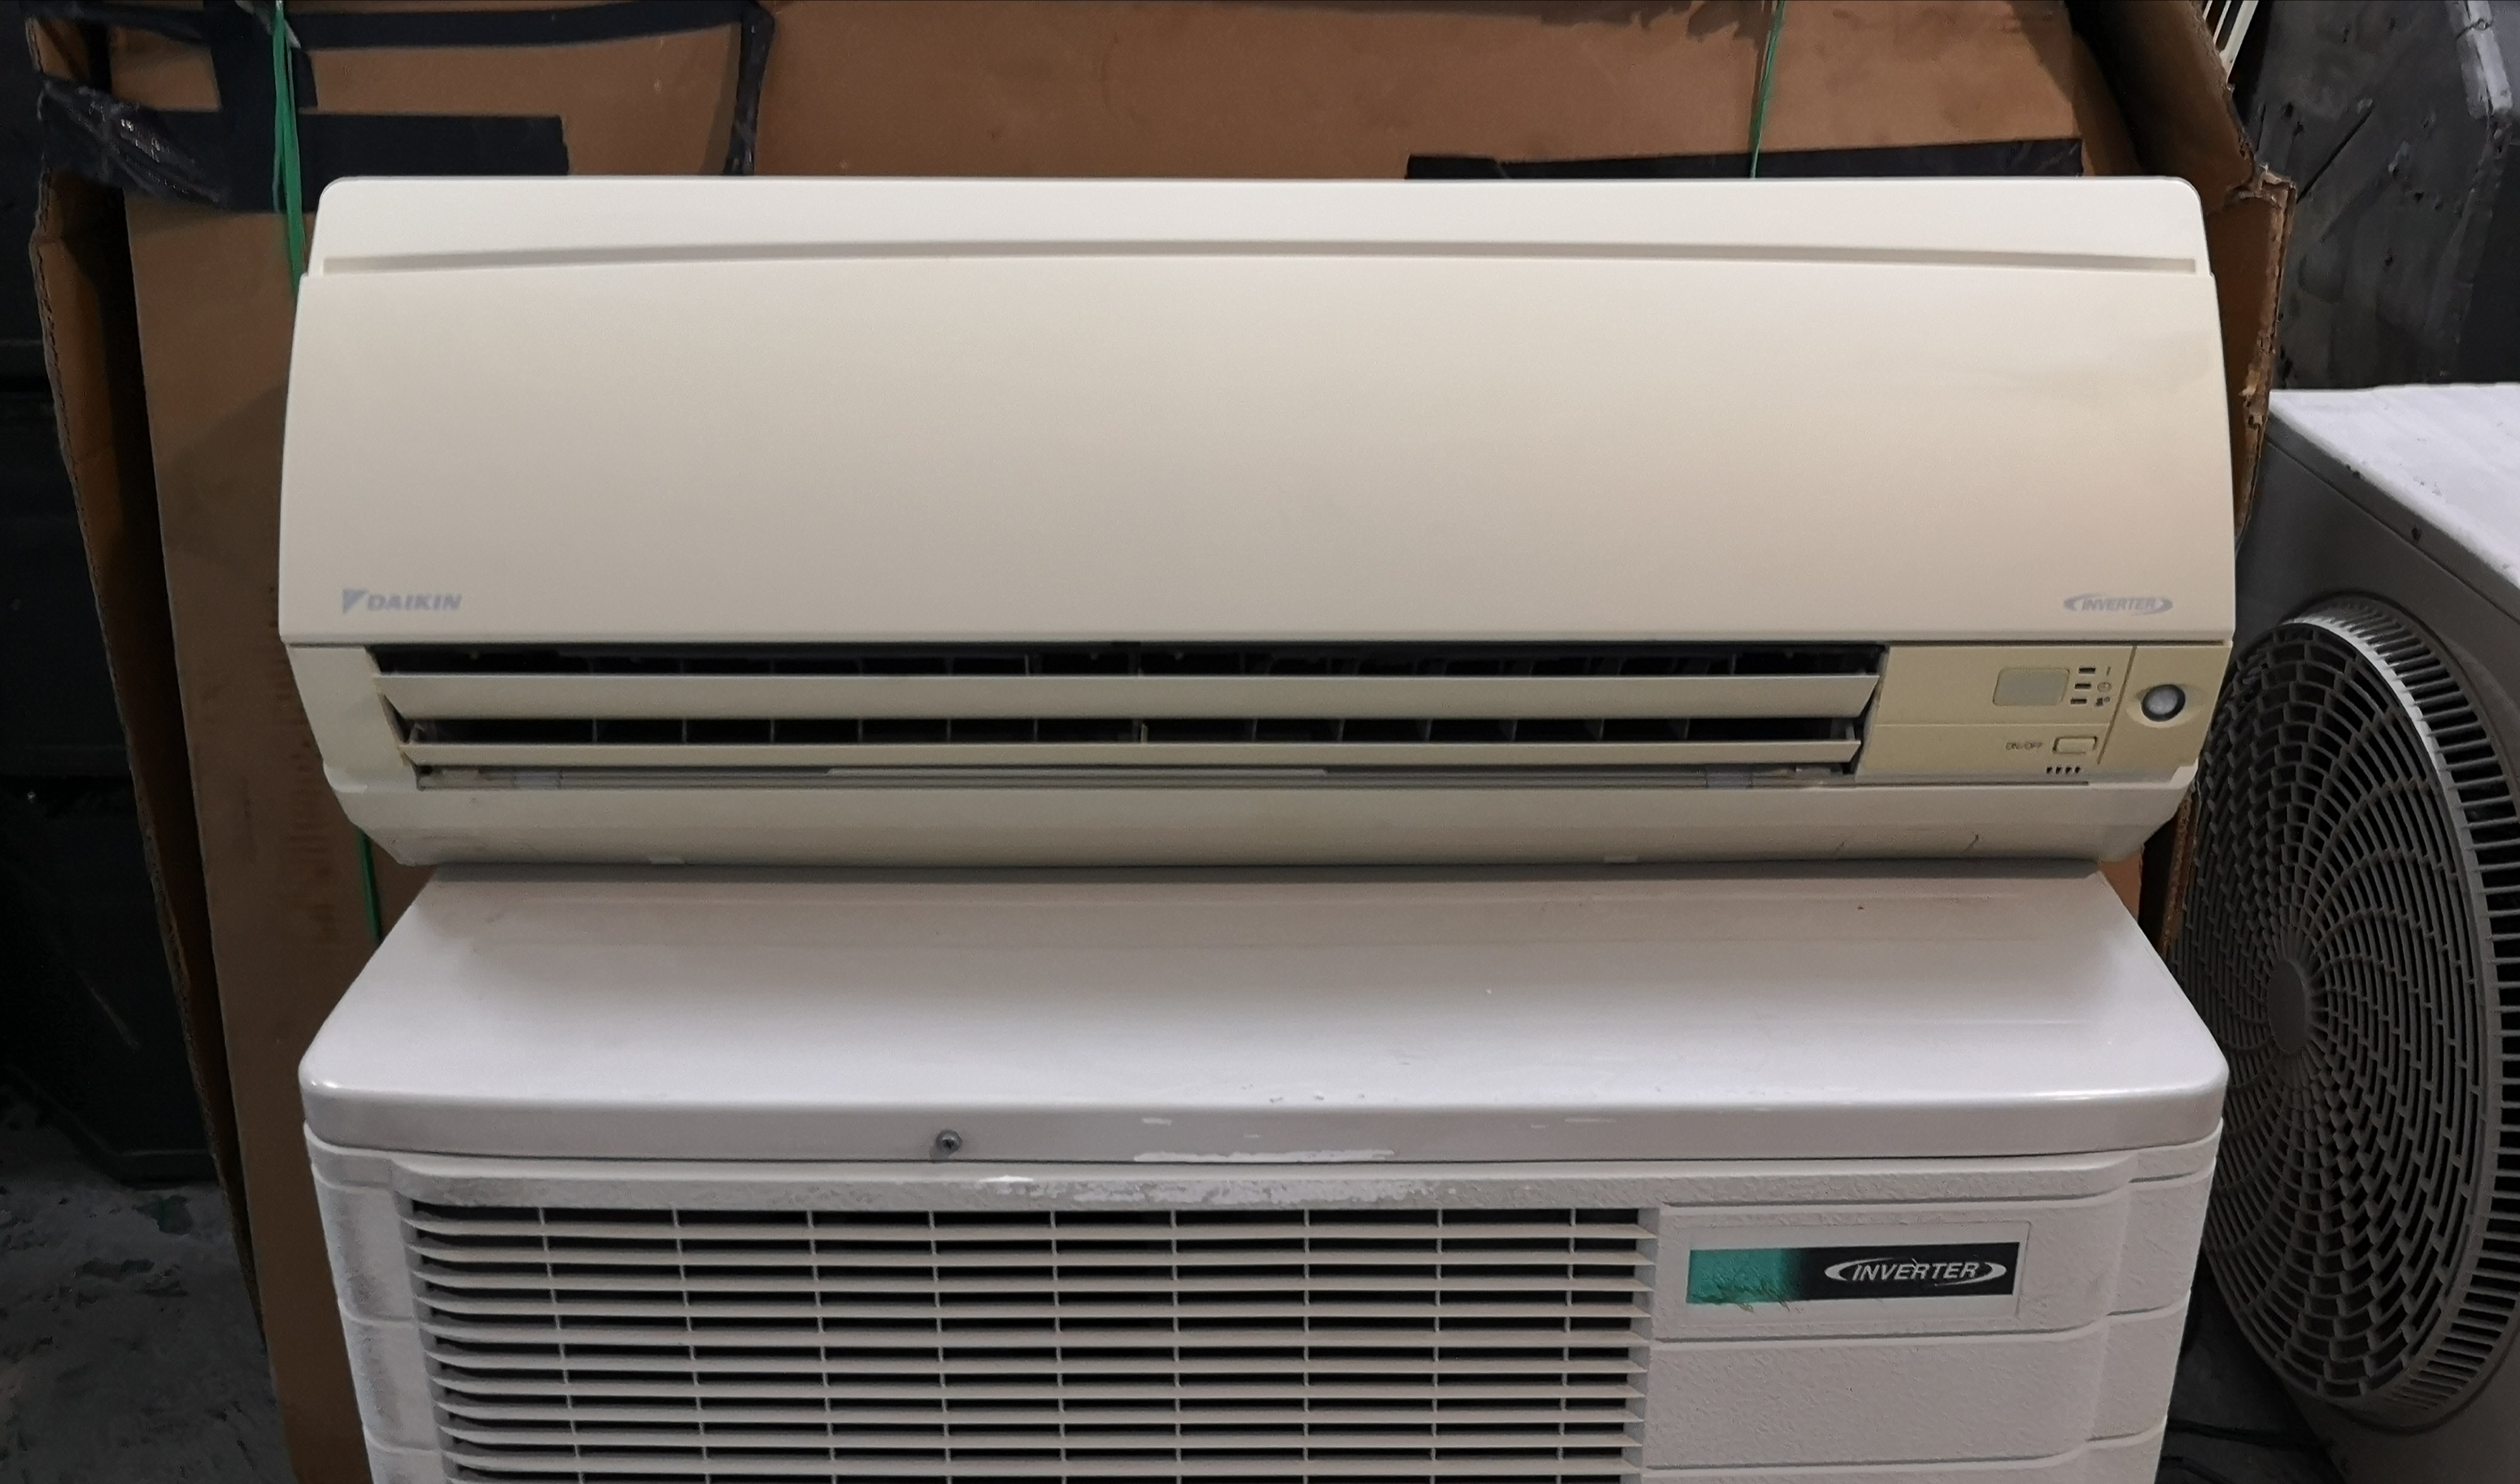 gv_ooi on Twitter: "✓ Used (Second-hand) ✓ Wall Mounted Type ✓ R22 ✓ 1.5HP  Daikin ✓ Inverter Type ✓ Warranty 1 Month For Wall Mounted Type ✓ Price is  not included installation /